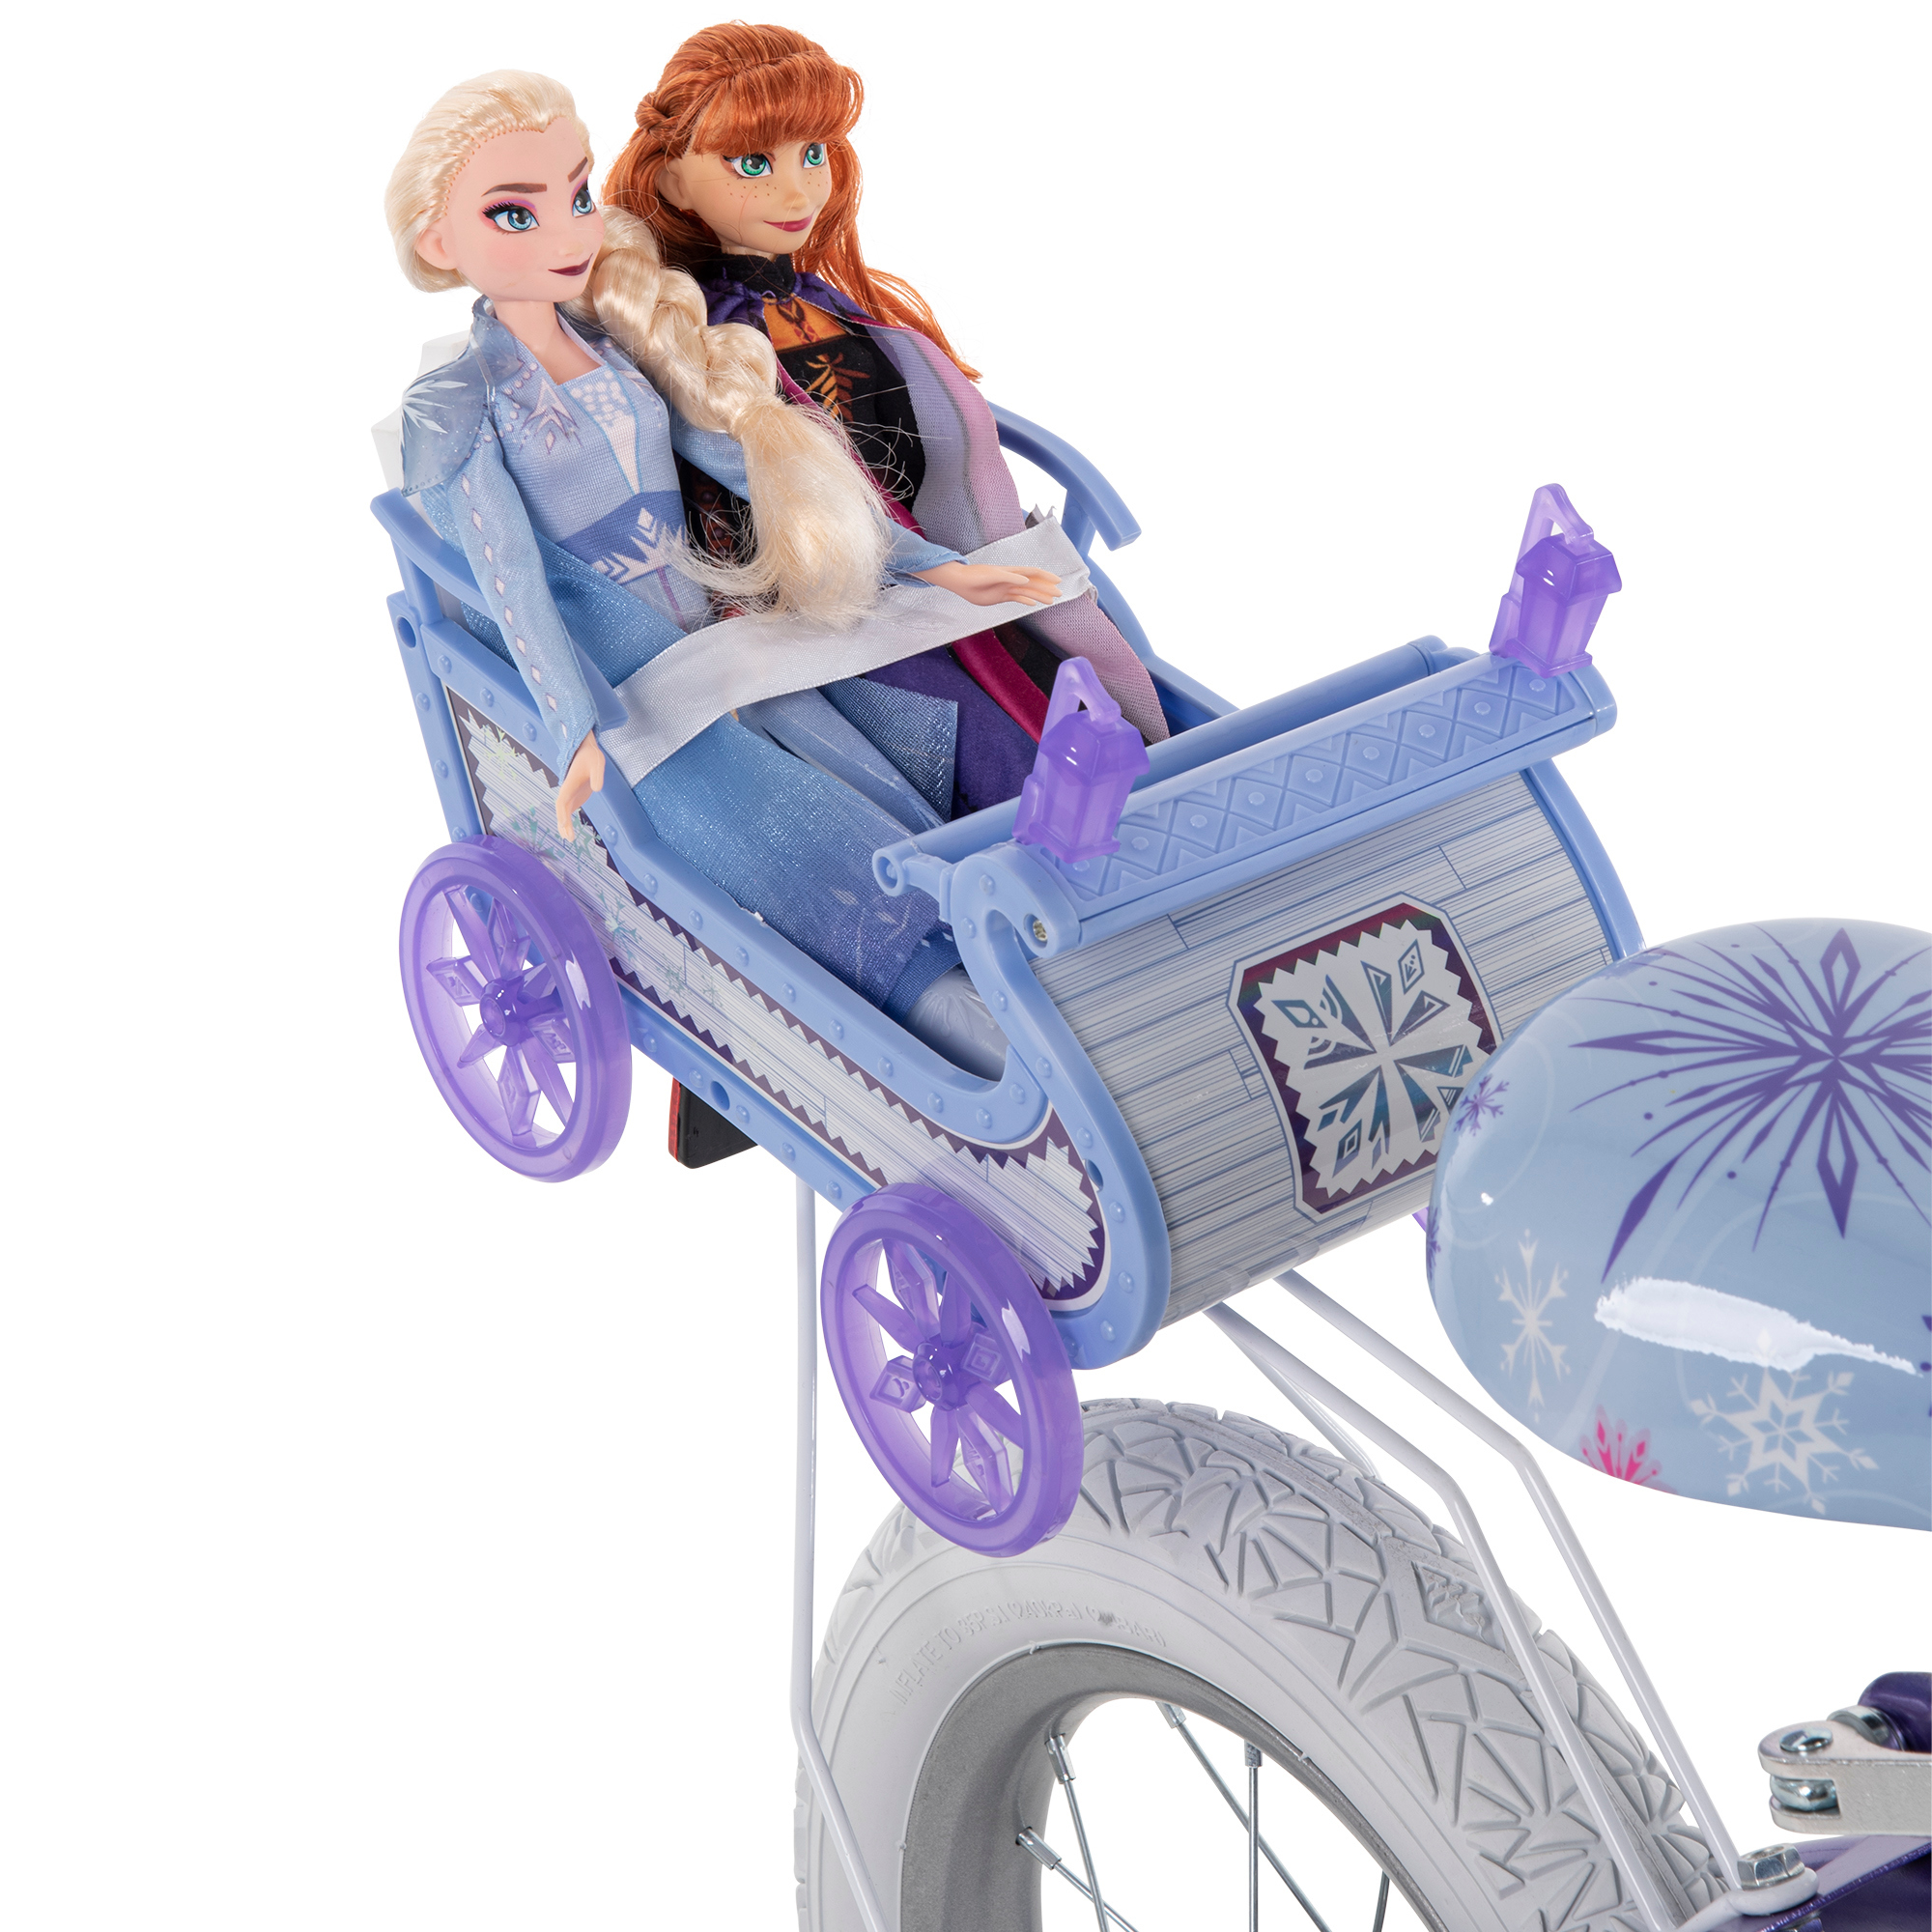 Disney Frozen 12 in. Bike with Doll Carrier Sleigh for Girl's, Ages 2+ Years, White and Purple by Huffy - image 13 of 19